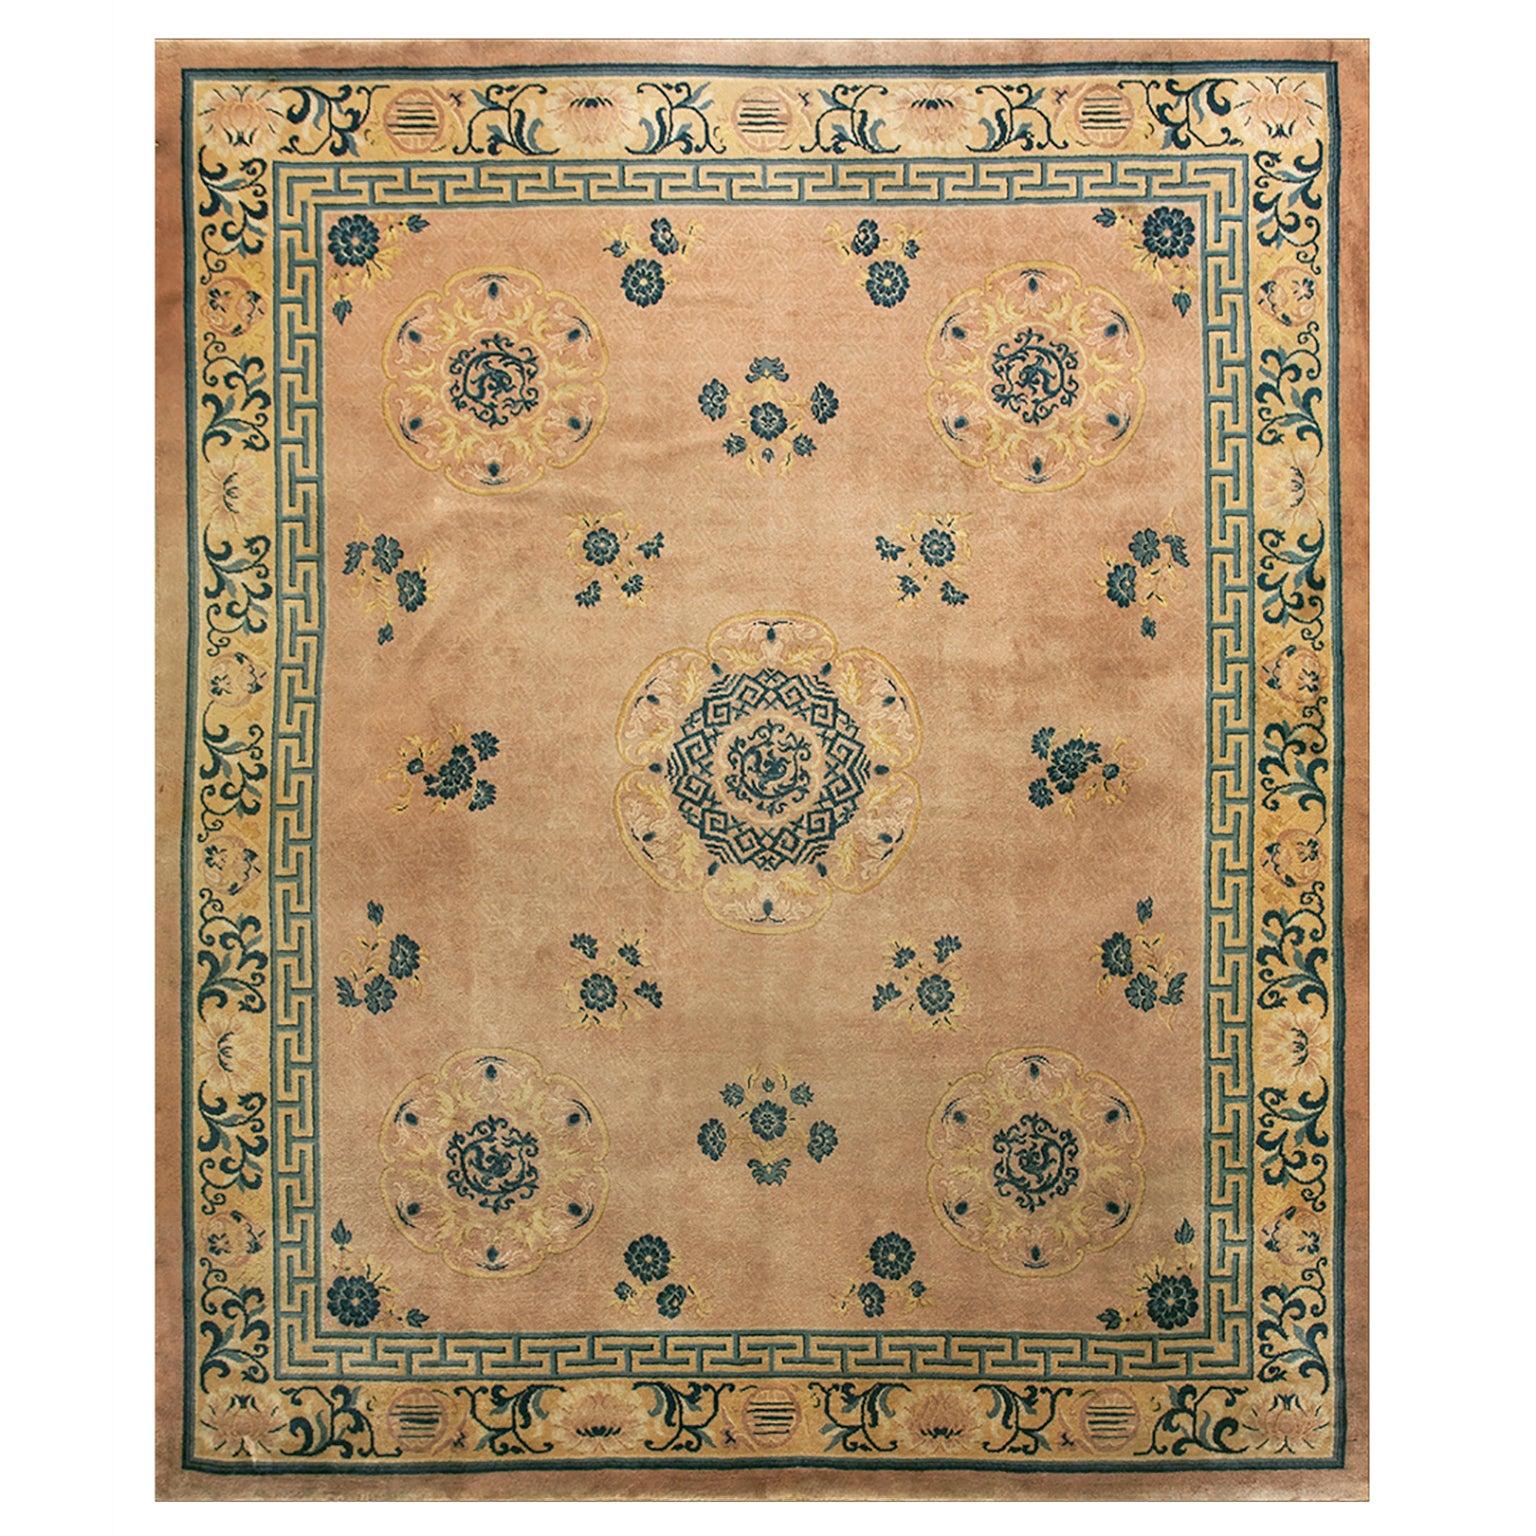 Early 20th Century Chinese Carpet ( 10'10" x 12'9" - 330 x 390 ) For Sale